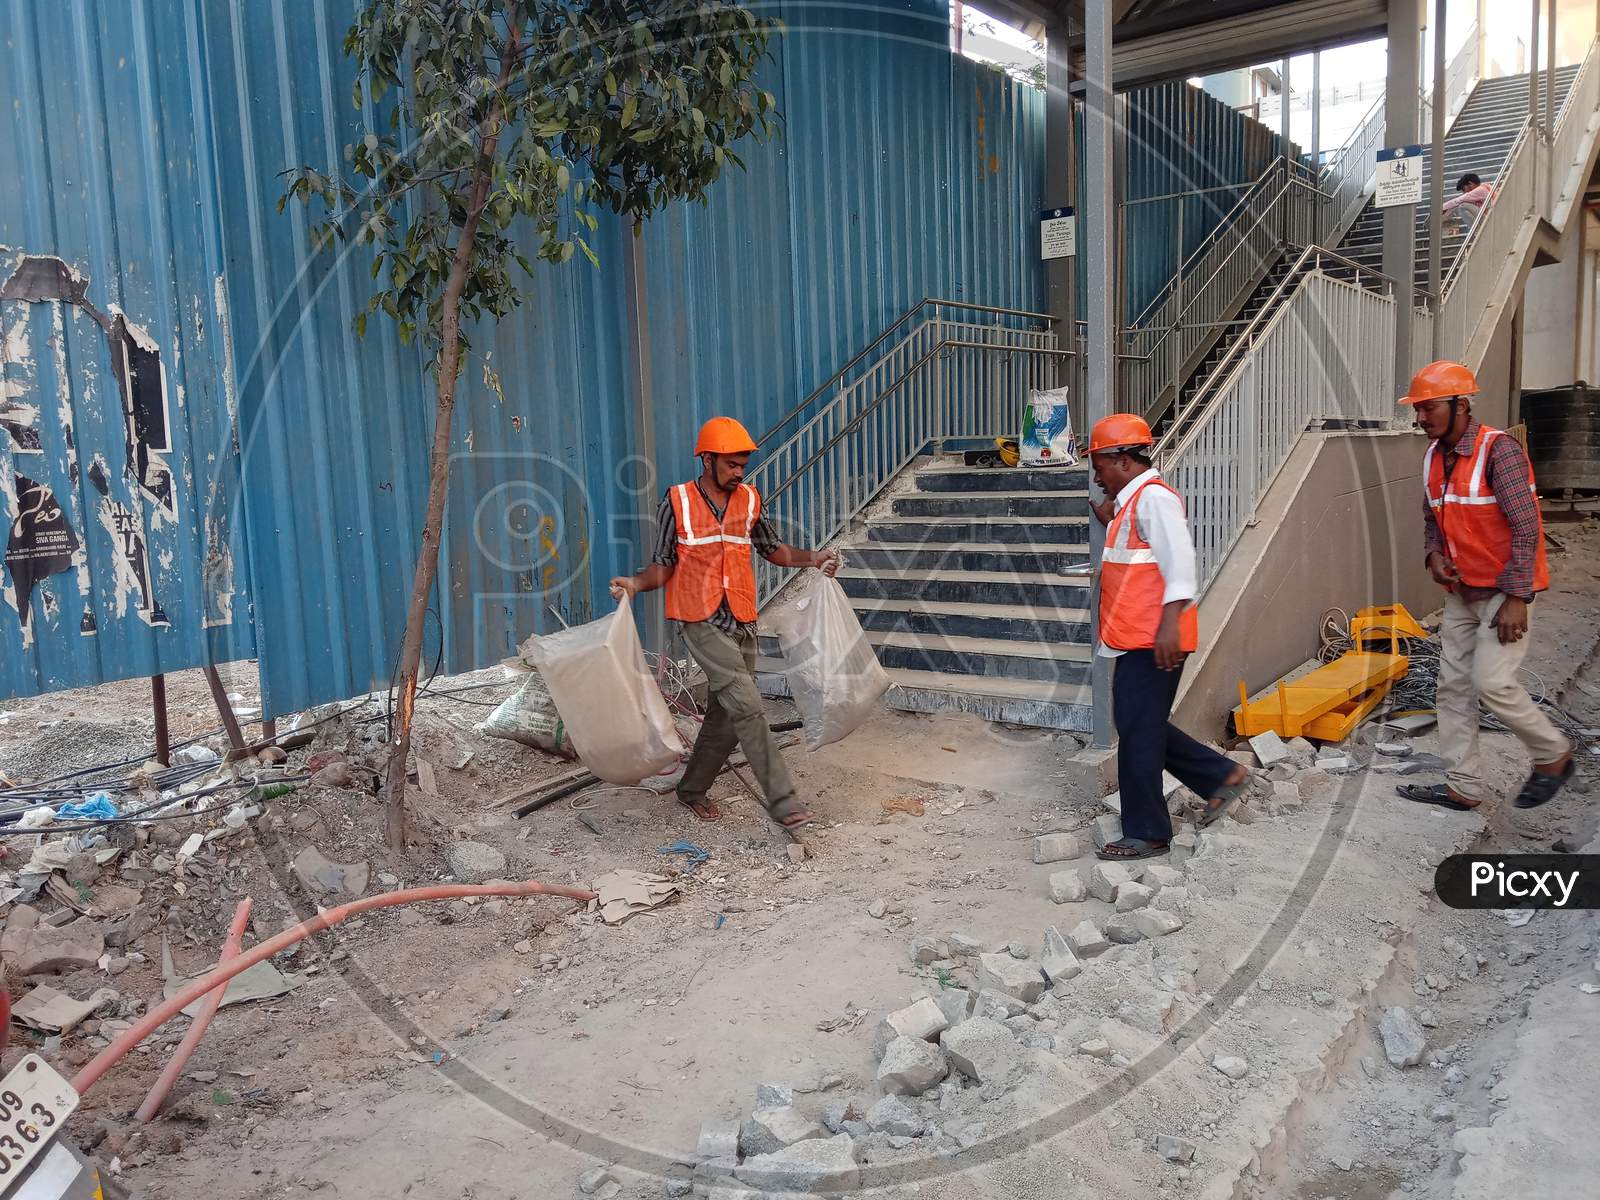 Workers Working At Under Construction Metro Tracks And Metro Stations in Hyderabad